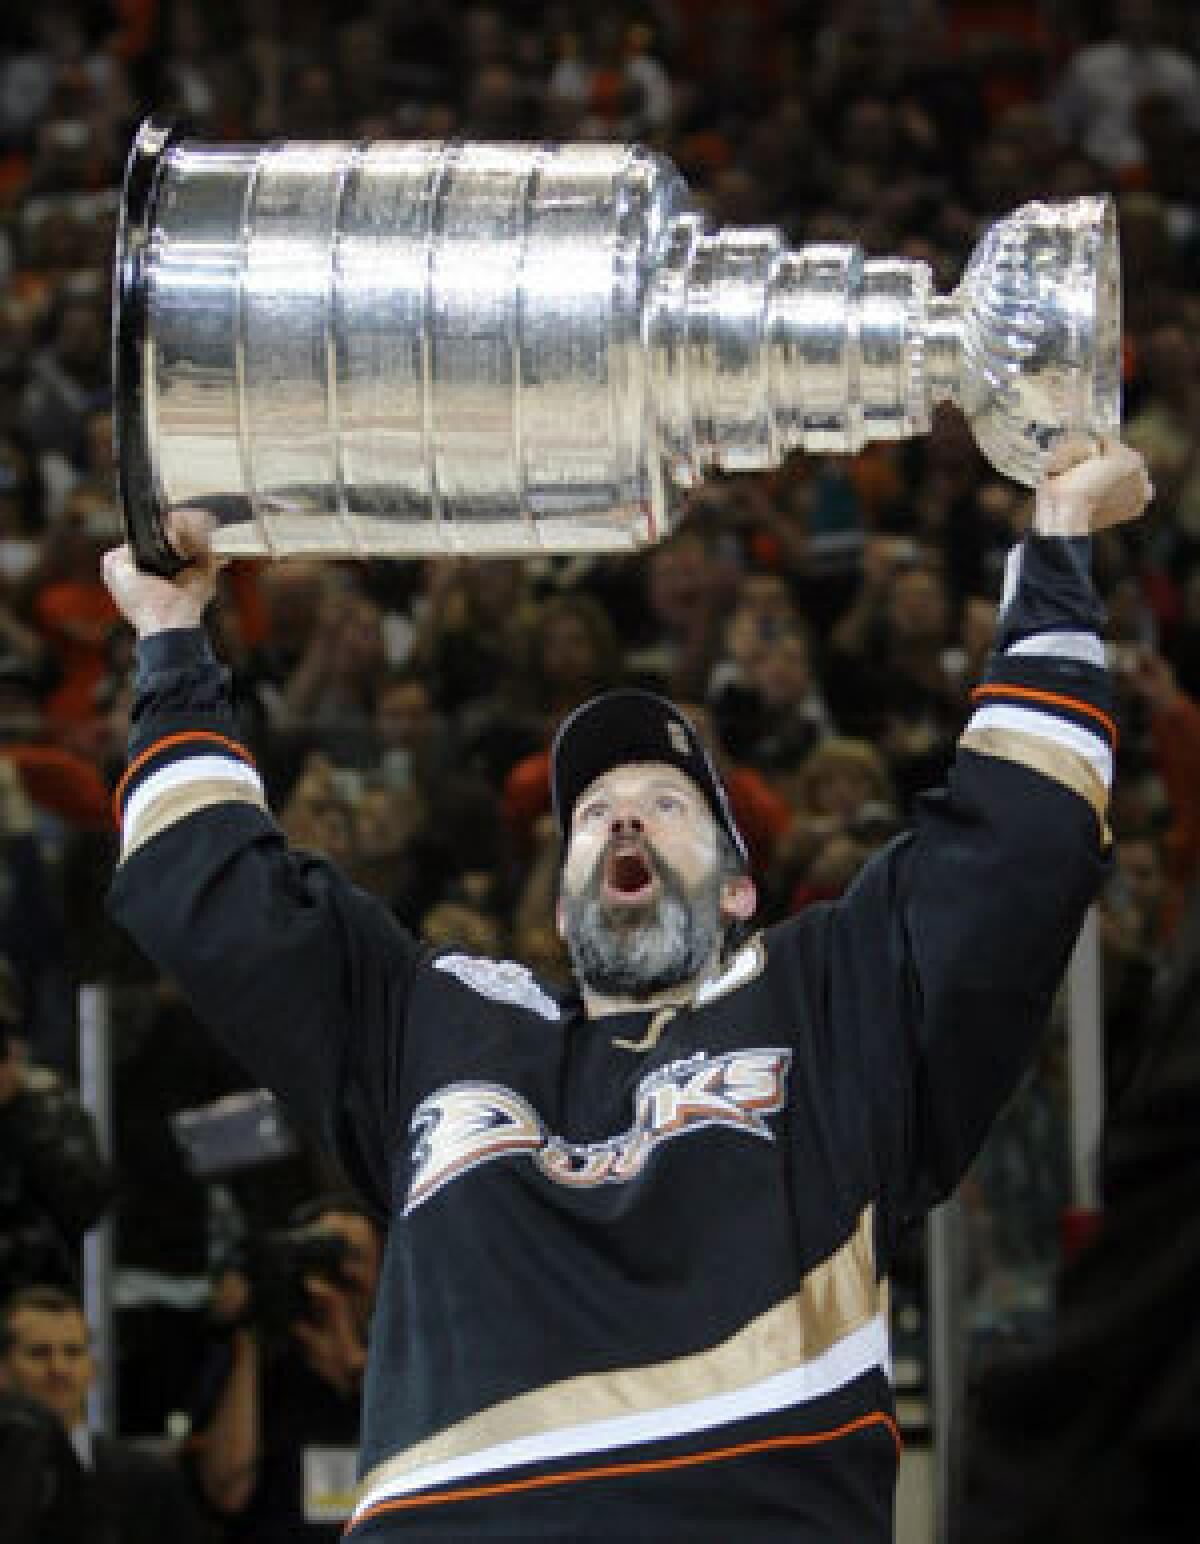 Scott Niedermayer won a Stanley Cup with the Ducks in 2007.